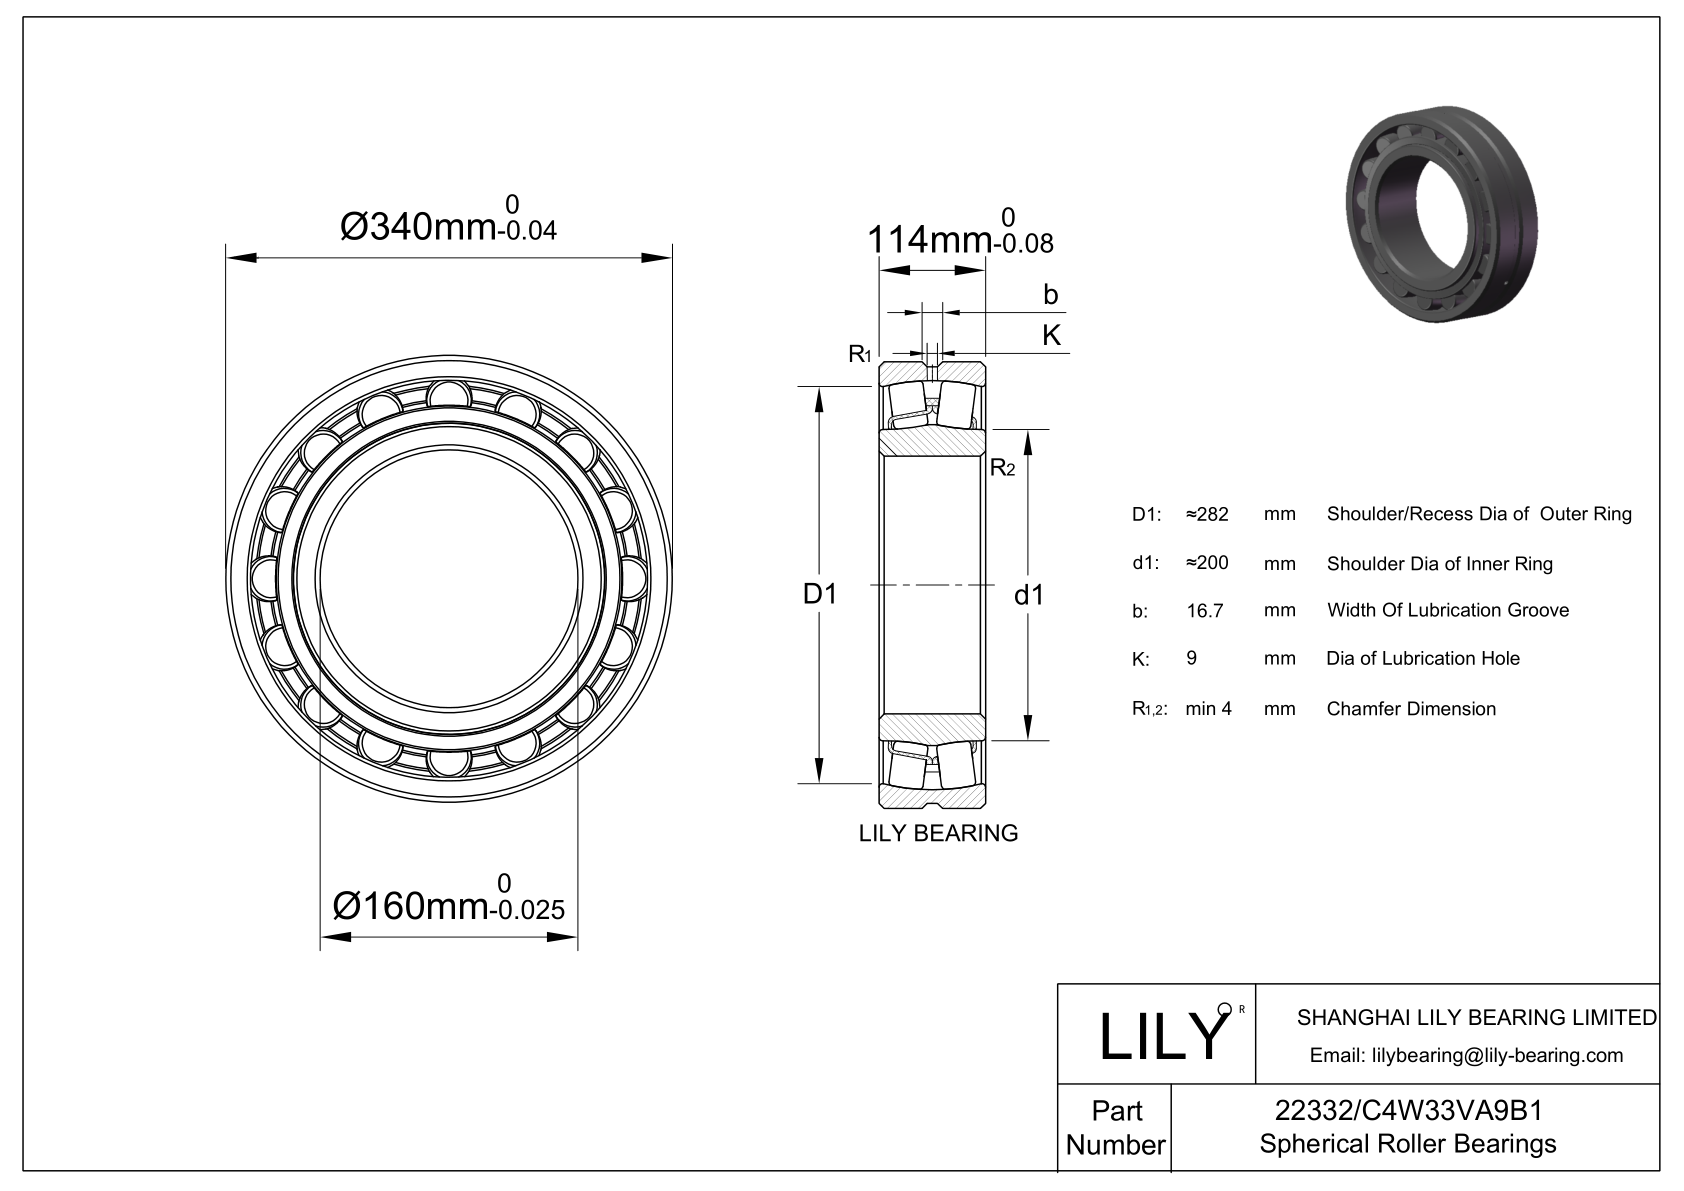 22332/C4W33VA9B1 Double Row Spherical Roller Bearing cad drawing